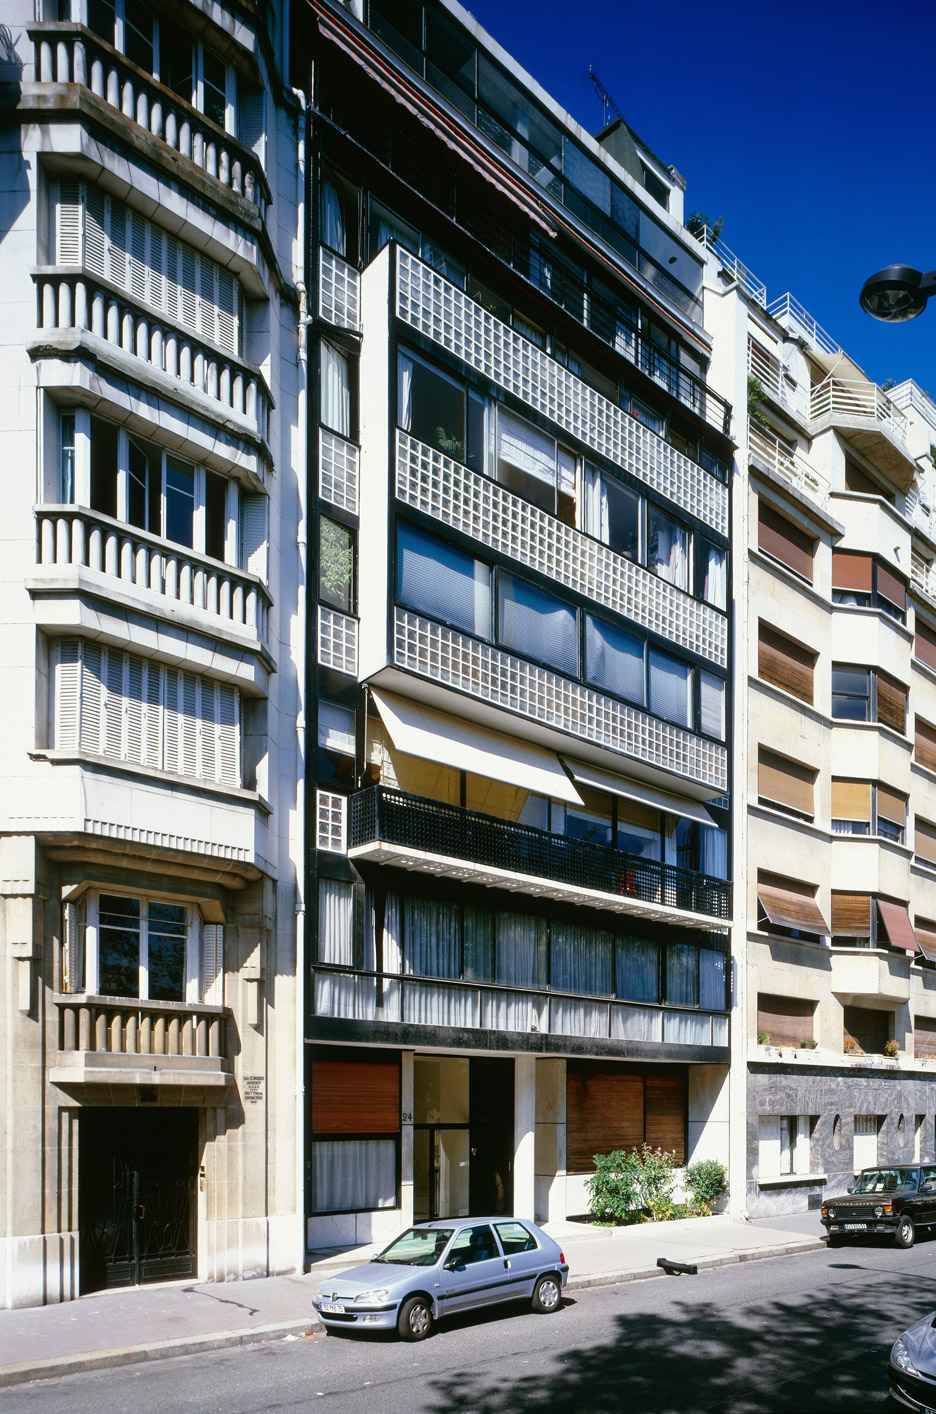 Immeuble Molitor by Le Corbusier